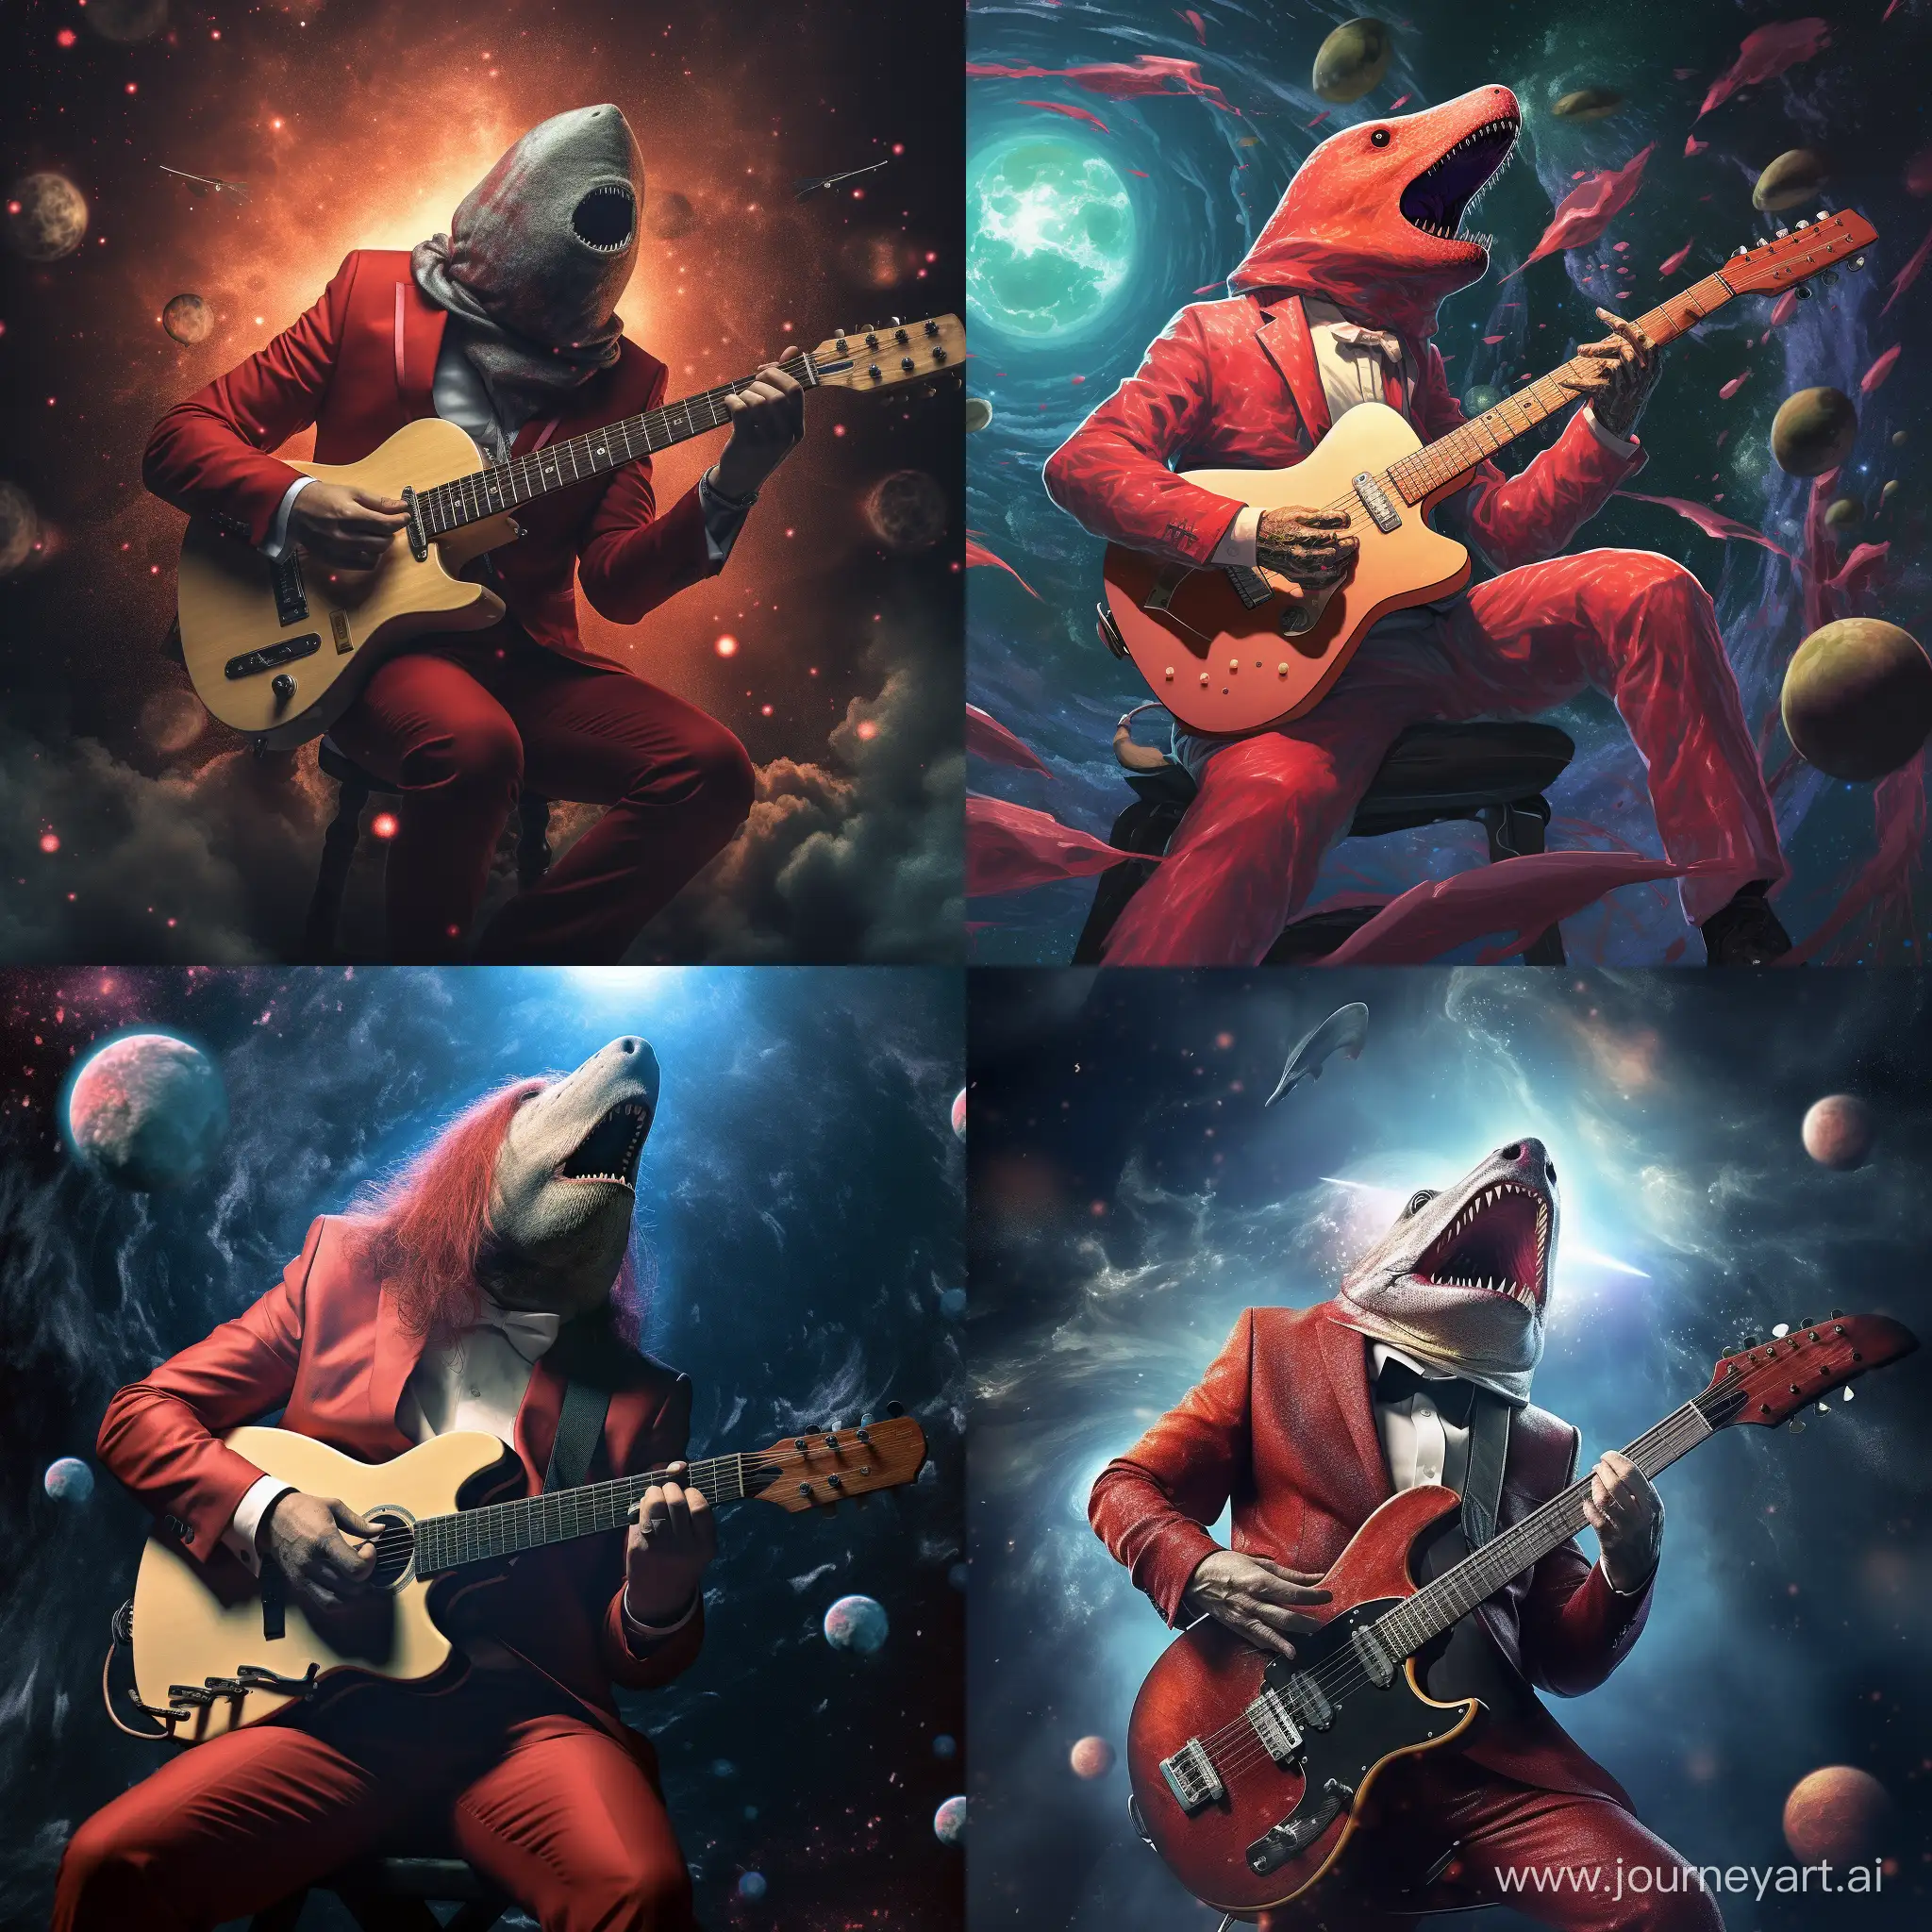 Cosmic-Shark-Musician-in-Red-Suit-Playing-Guitar